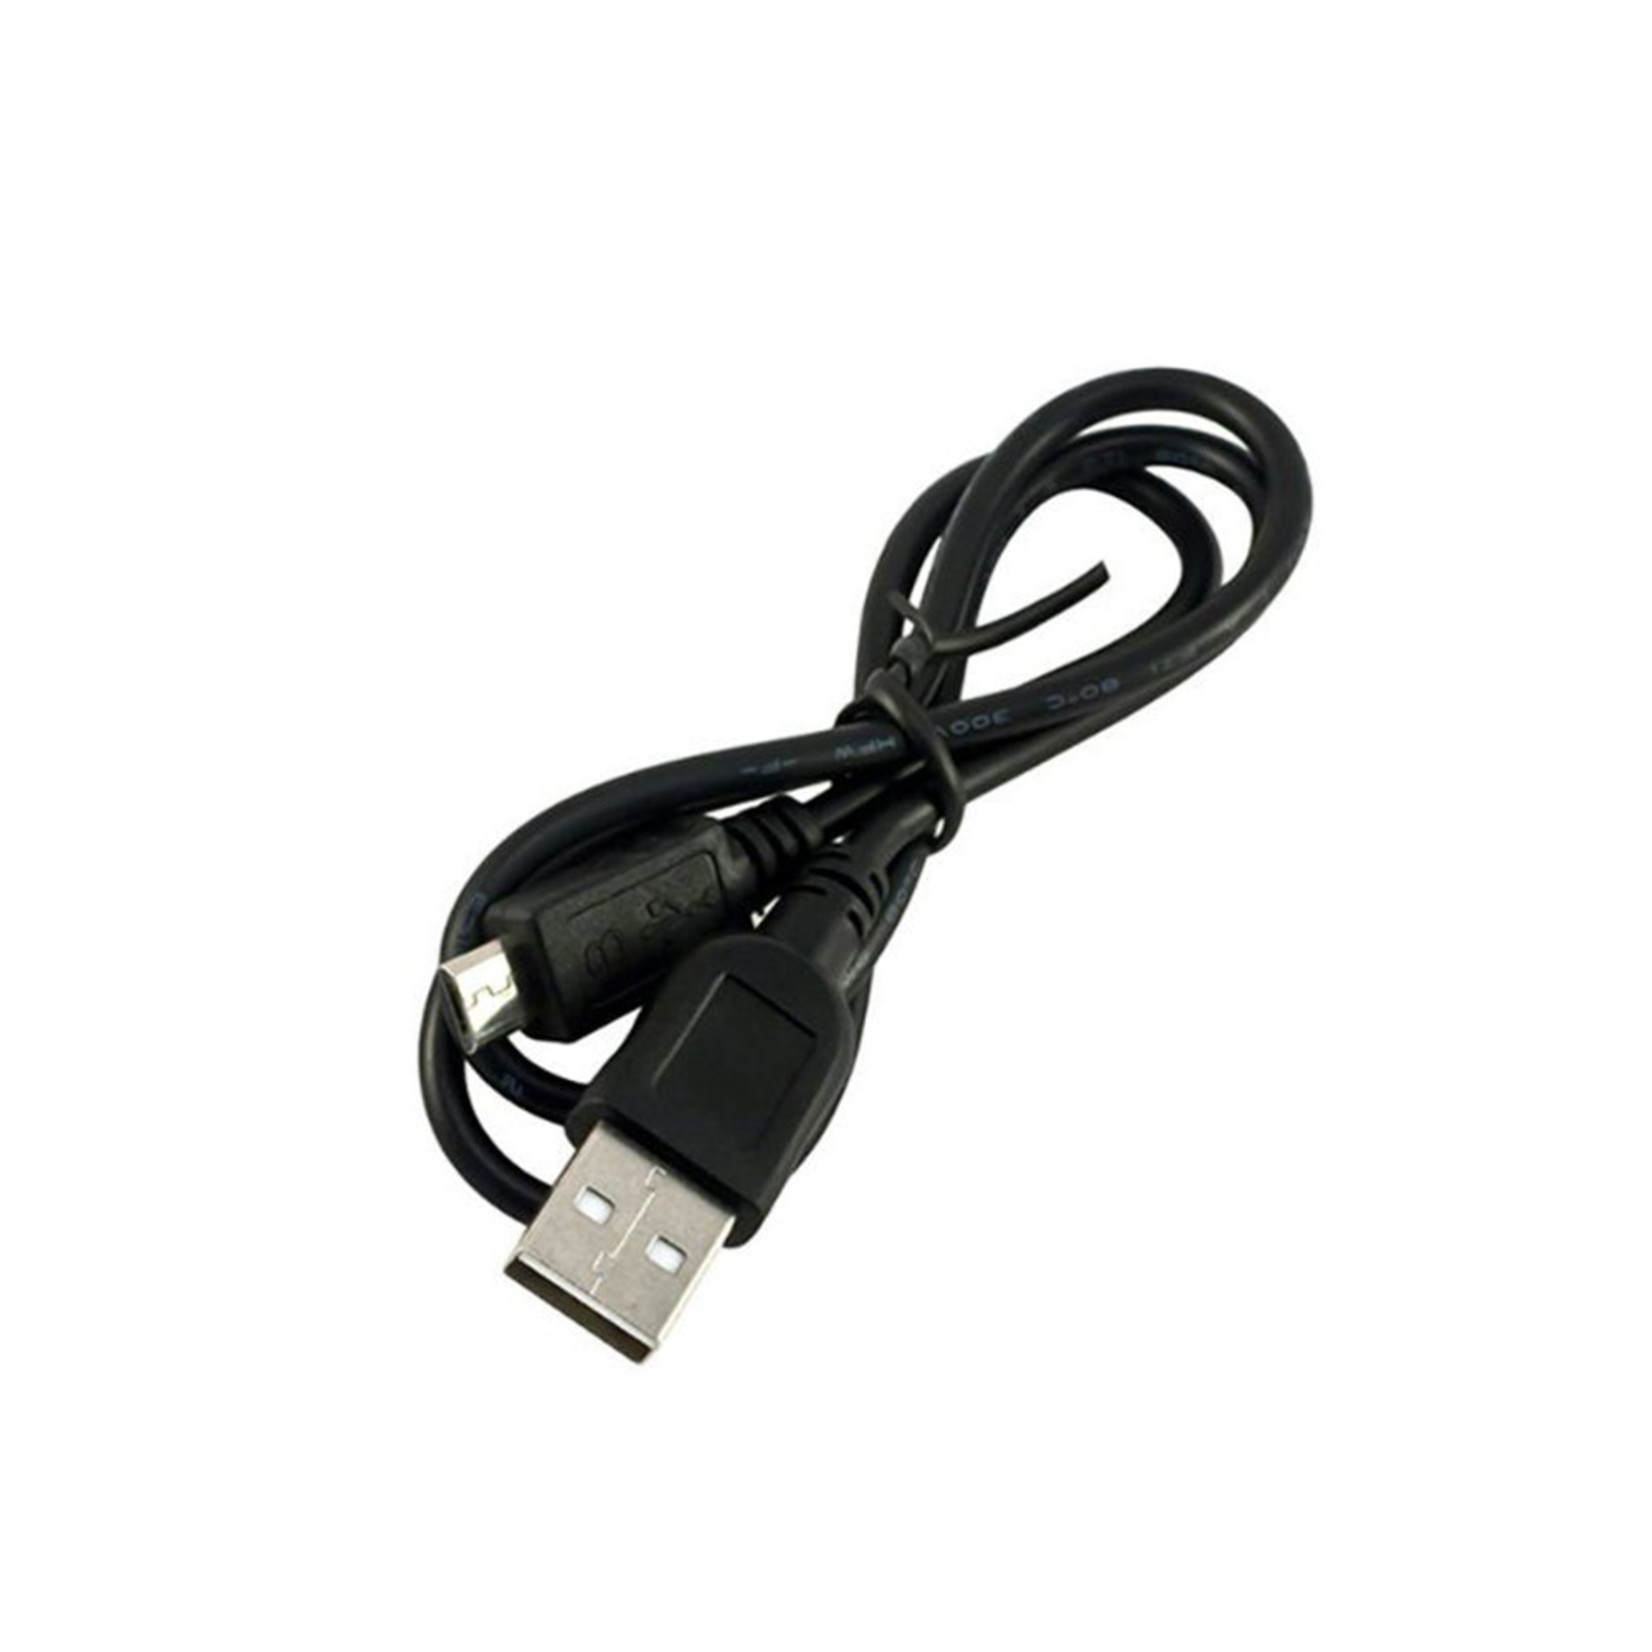 Niterider Niterider Micro Usb Charge Cable For USB Rechargeable Batteries